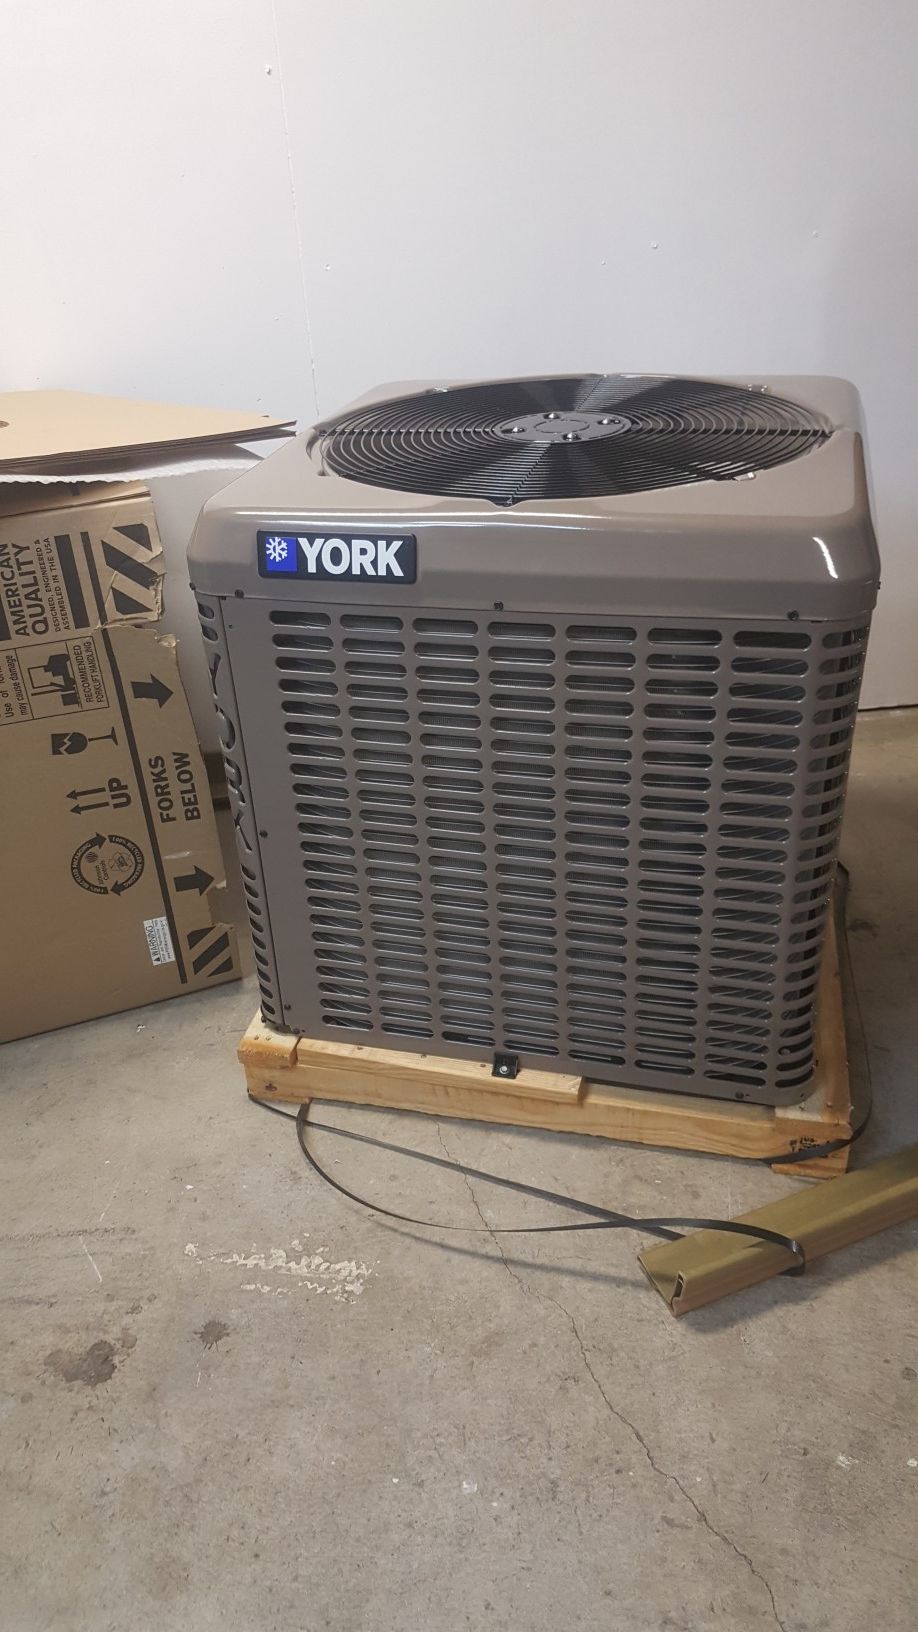 York 2 Ton Ac Condenser Brand New! With Warranty Priced To Sell!